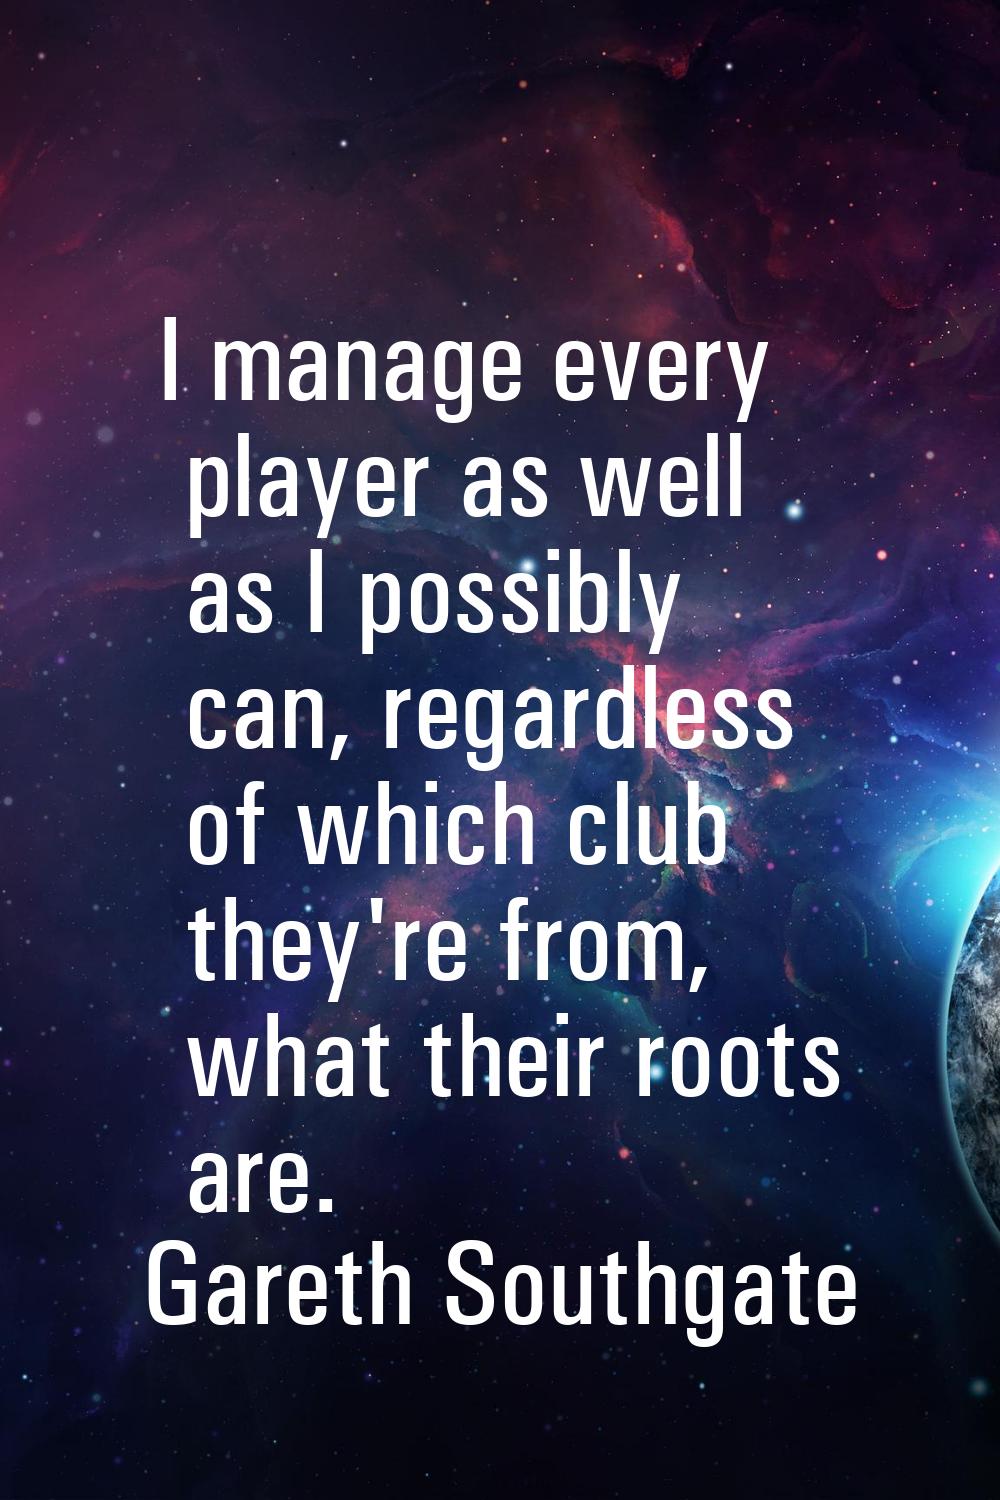 I manage every player as well as I possibly can, regardless of which club they're from, what their 